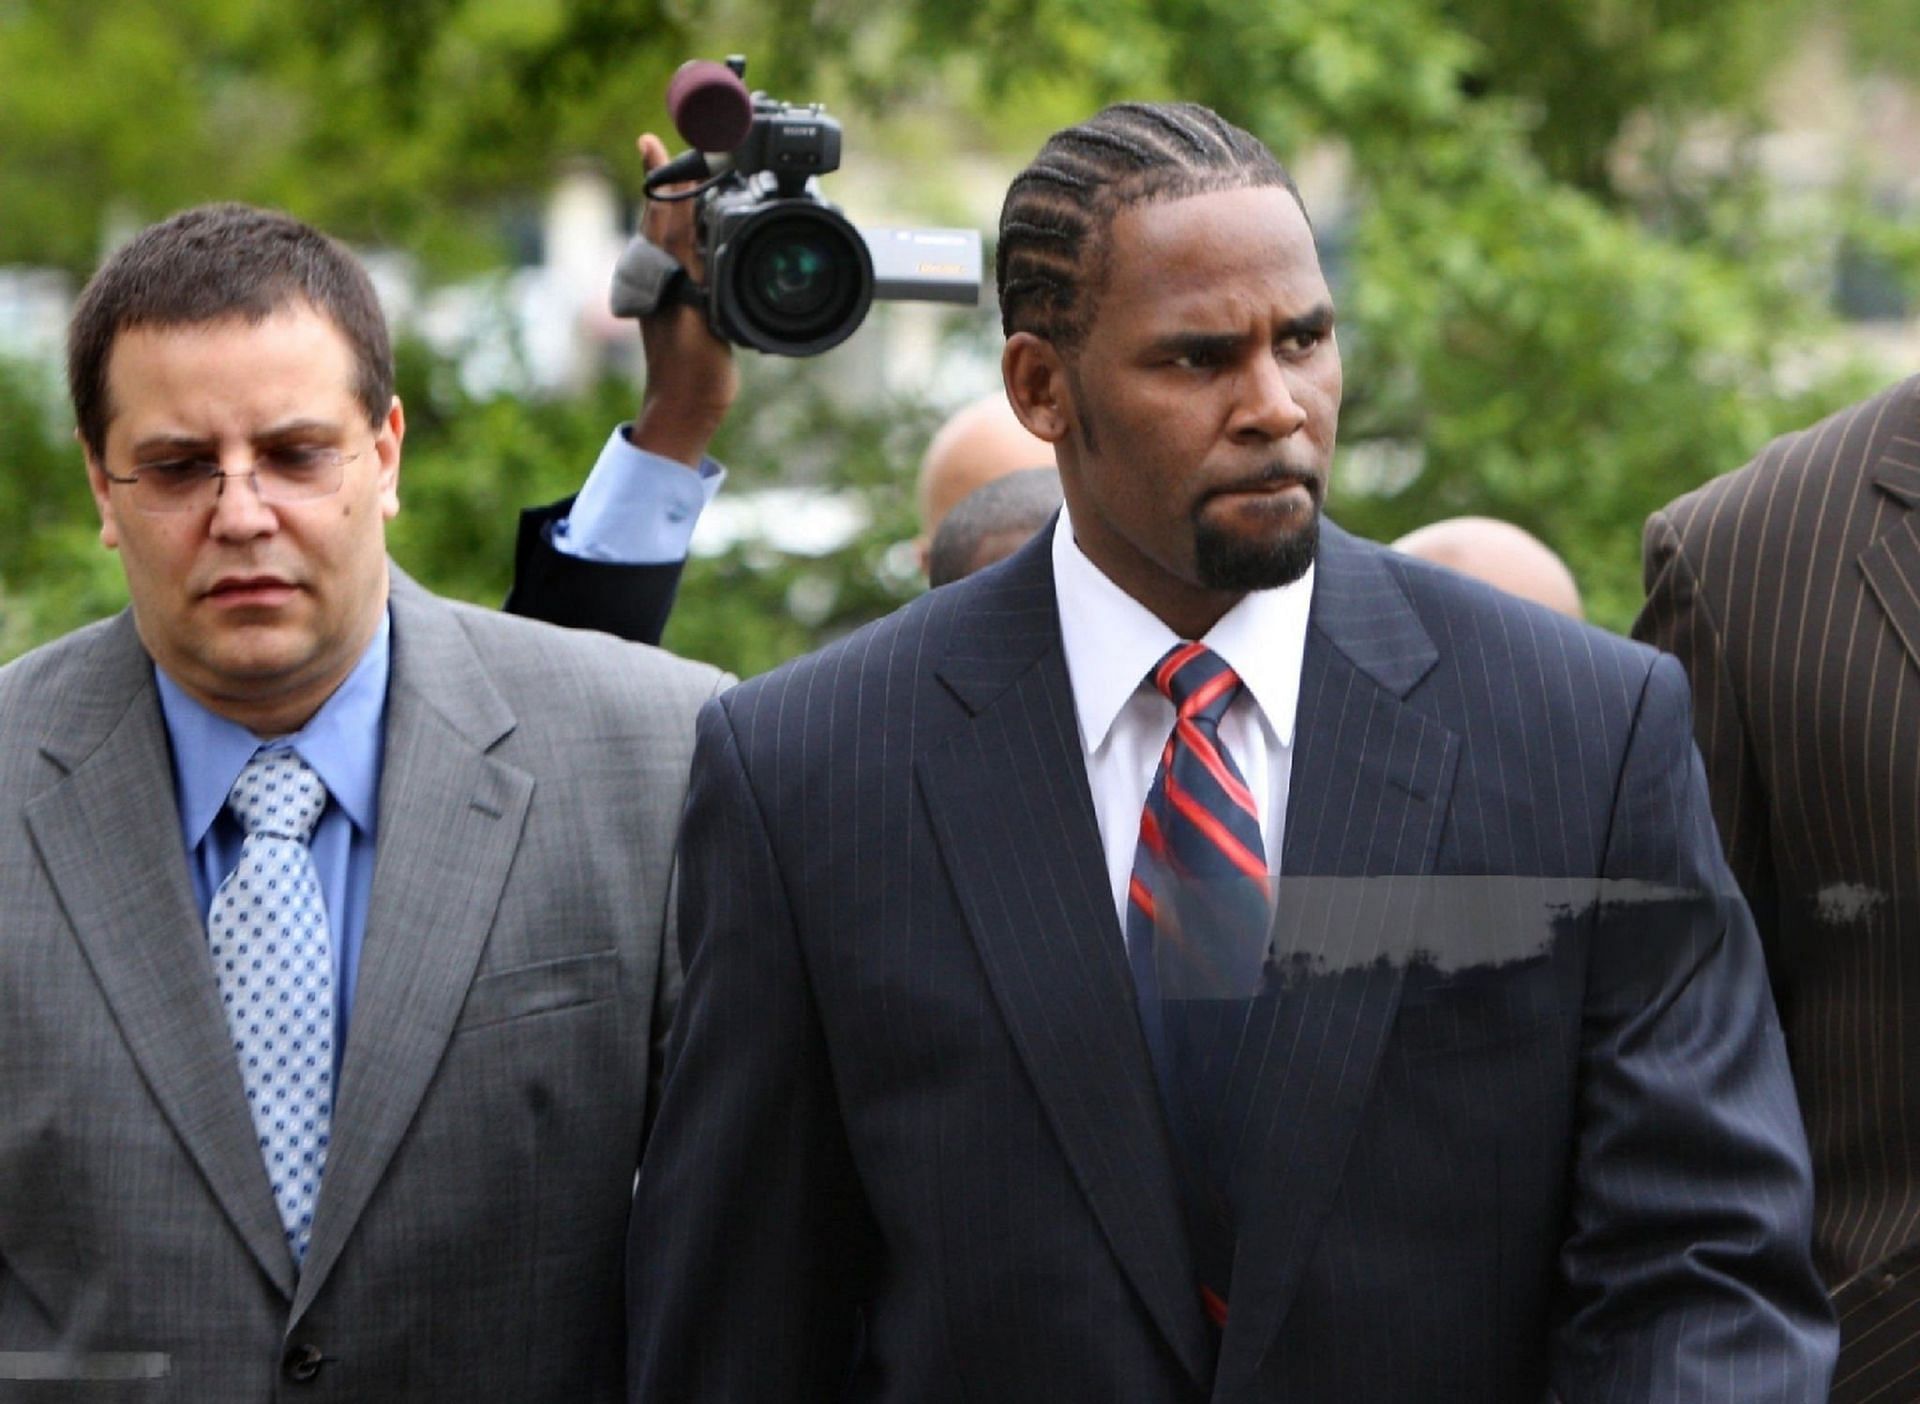 R. Kelly arriving at Cook County Court for trial in 2008( Image Via Getty)